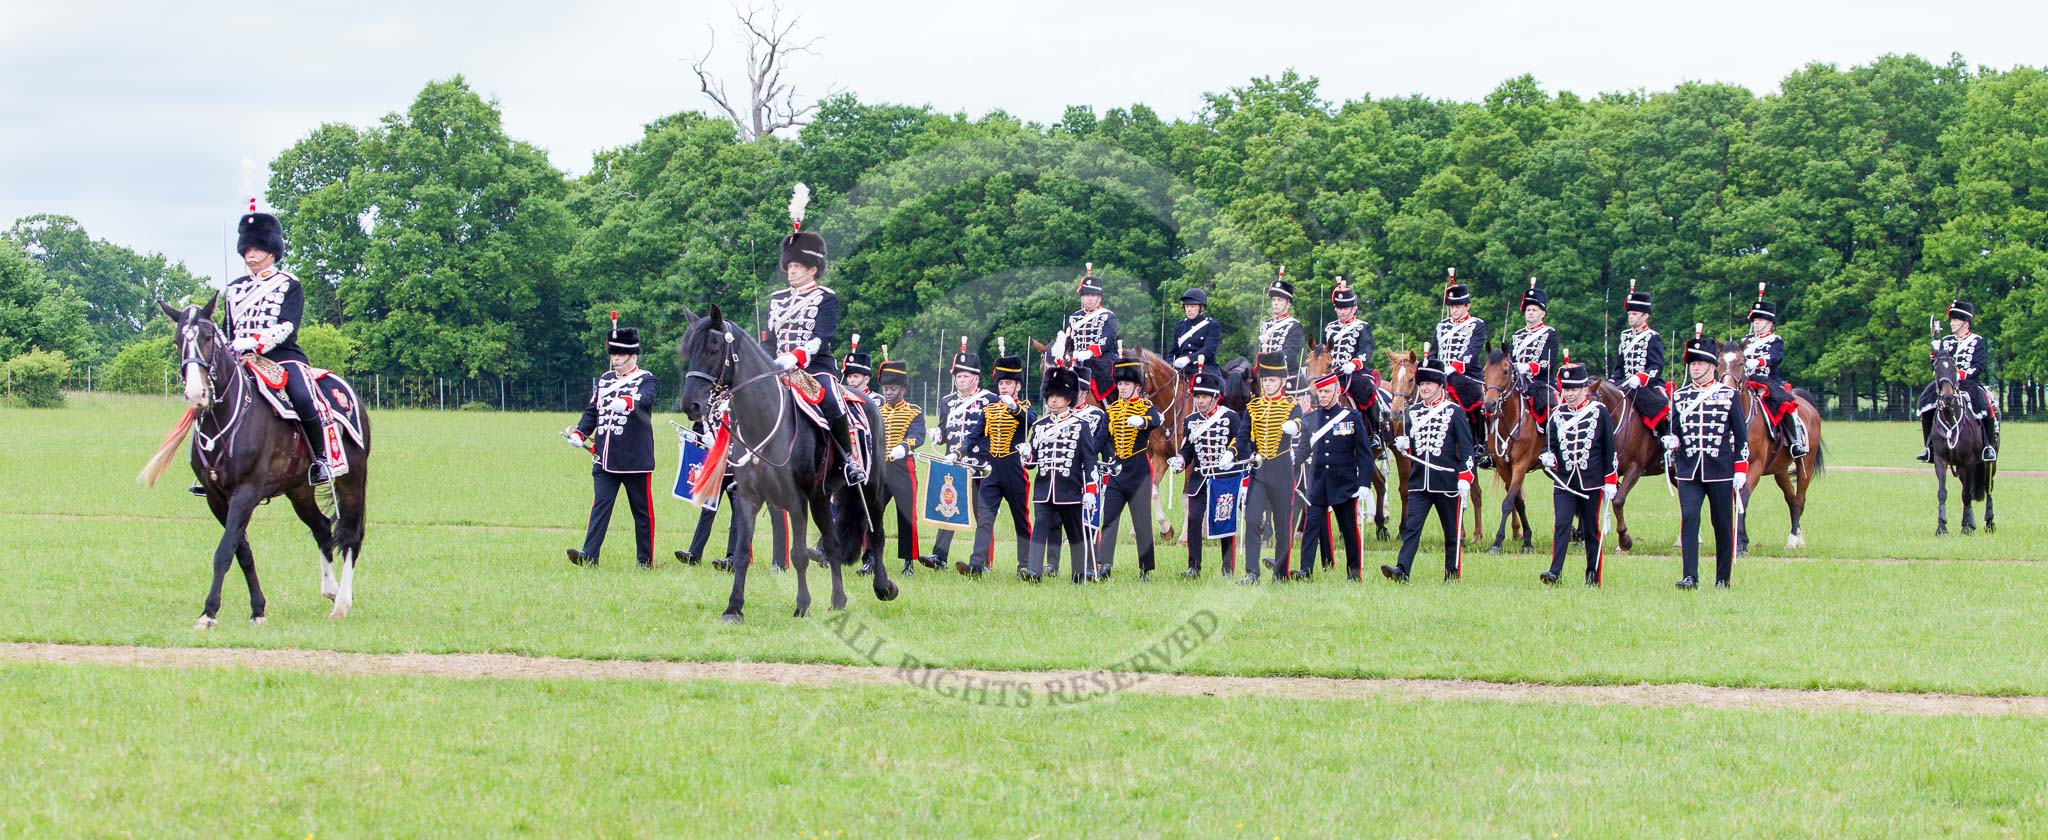 The Light Cavalry HAC Annual Review and Inspection 2013.
Windsor Great Park Review Ground,
Windsor,
Berkshire,
United Kingdom,
on 09 June 2013 at 13:39, image #474